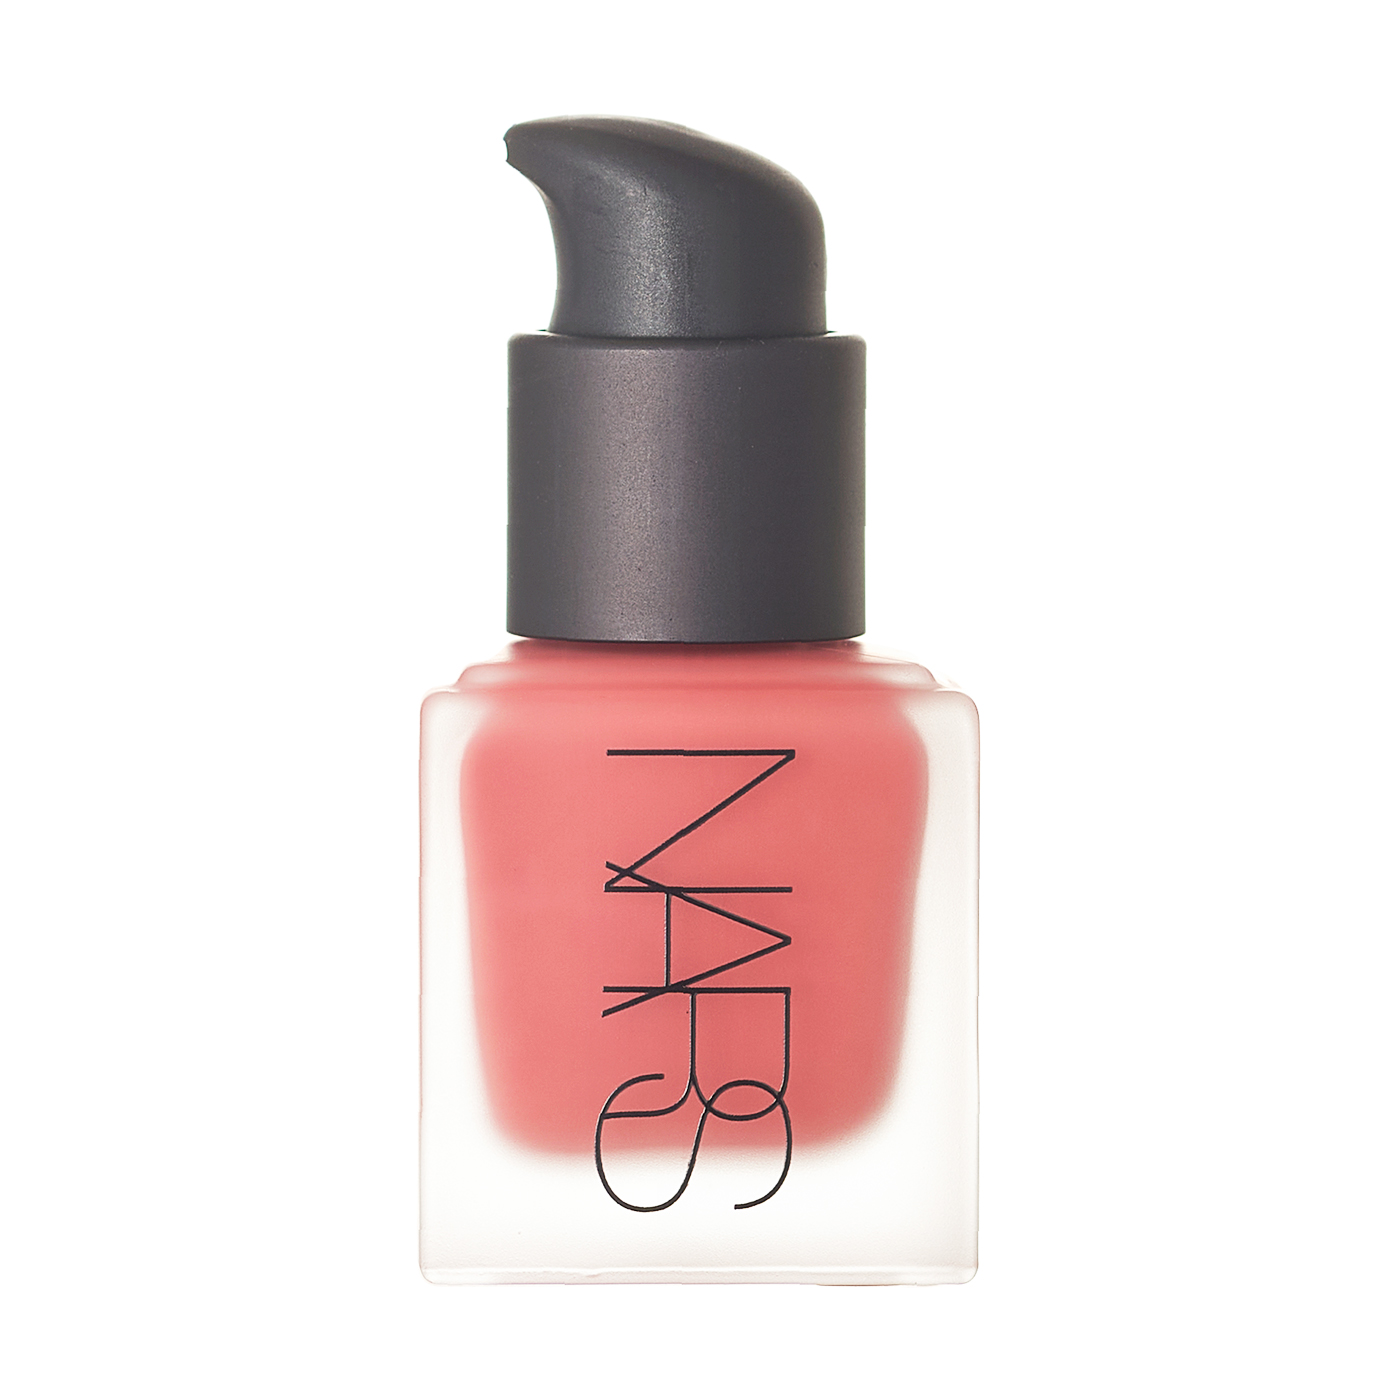 NARS リキッドブラッシュ 5158 - チーク